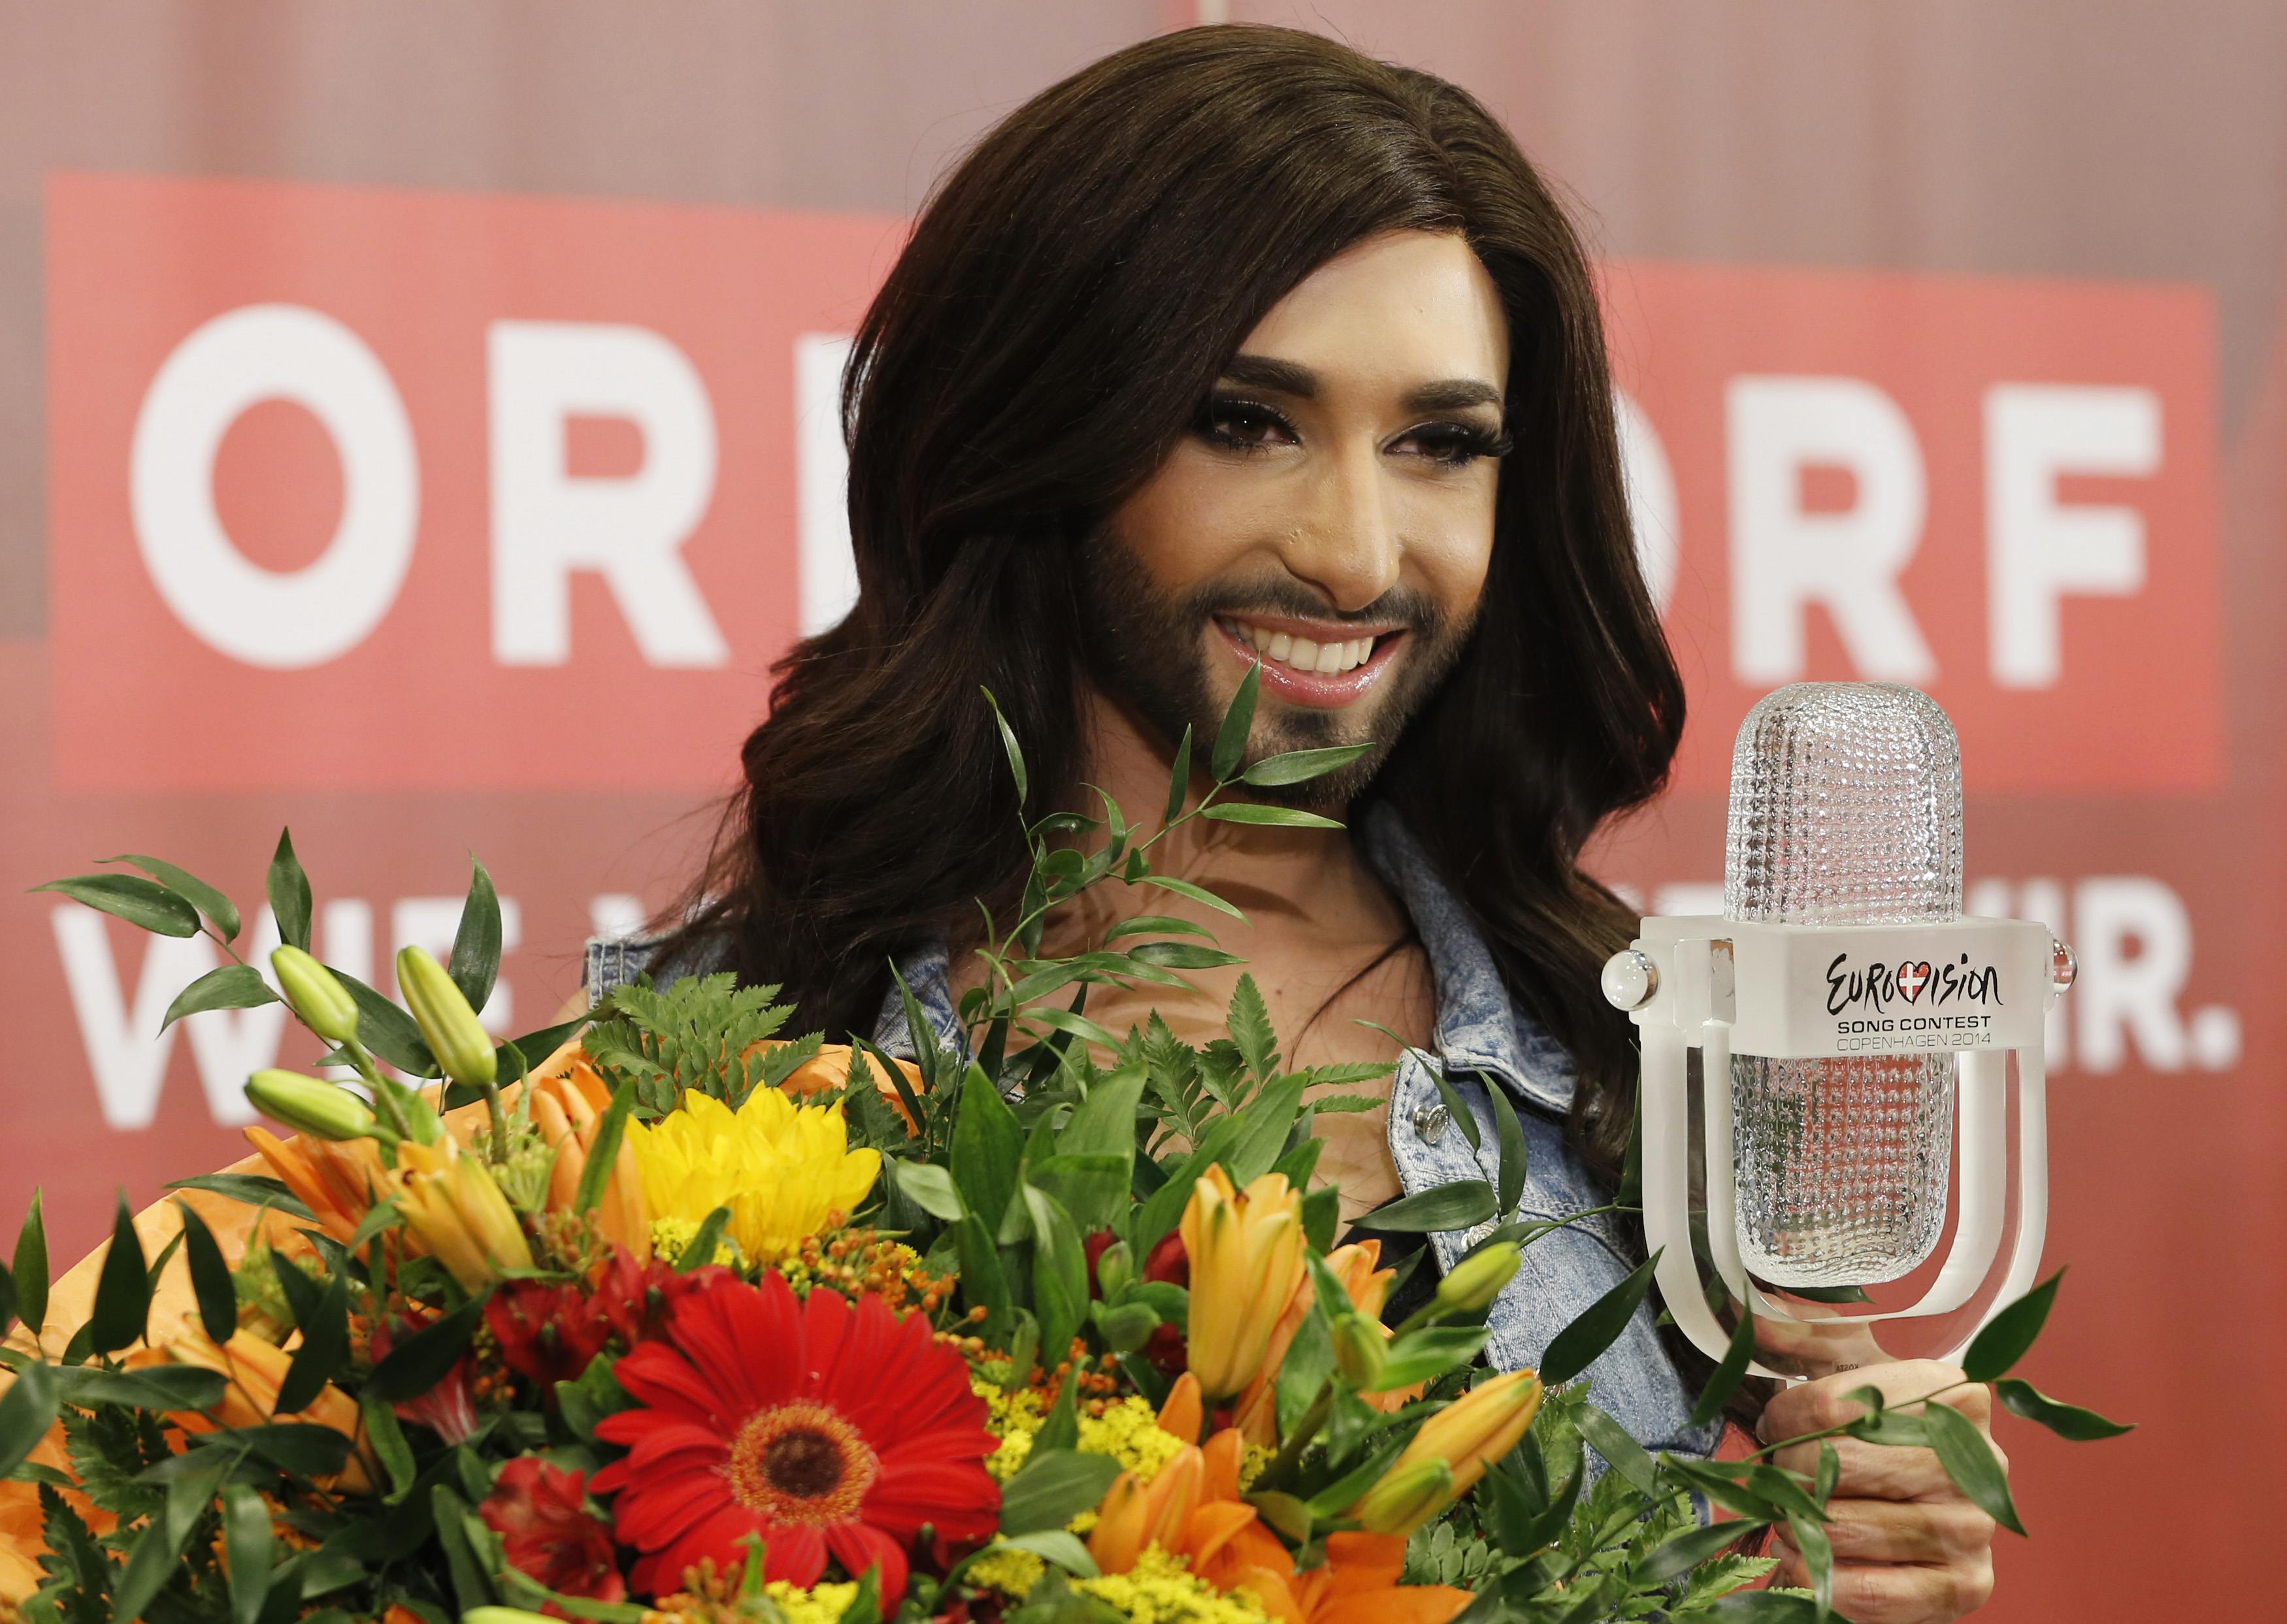 Austria's Conchita Wurst poses with her trophy and flowers after a news conference in Vienna